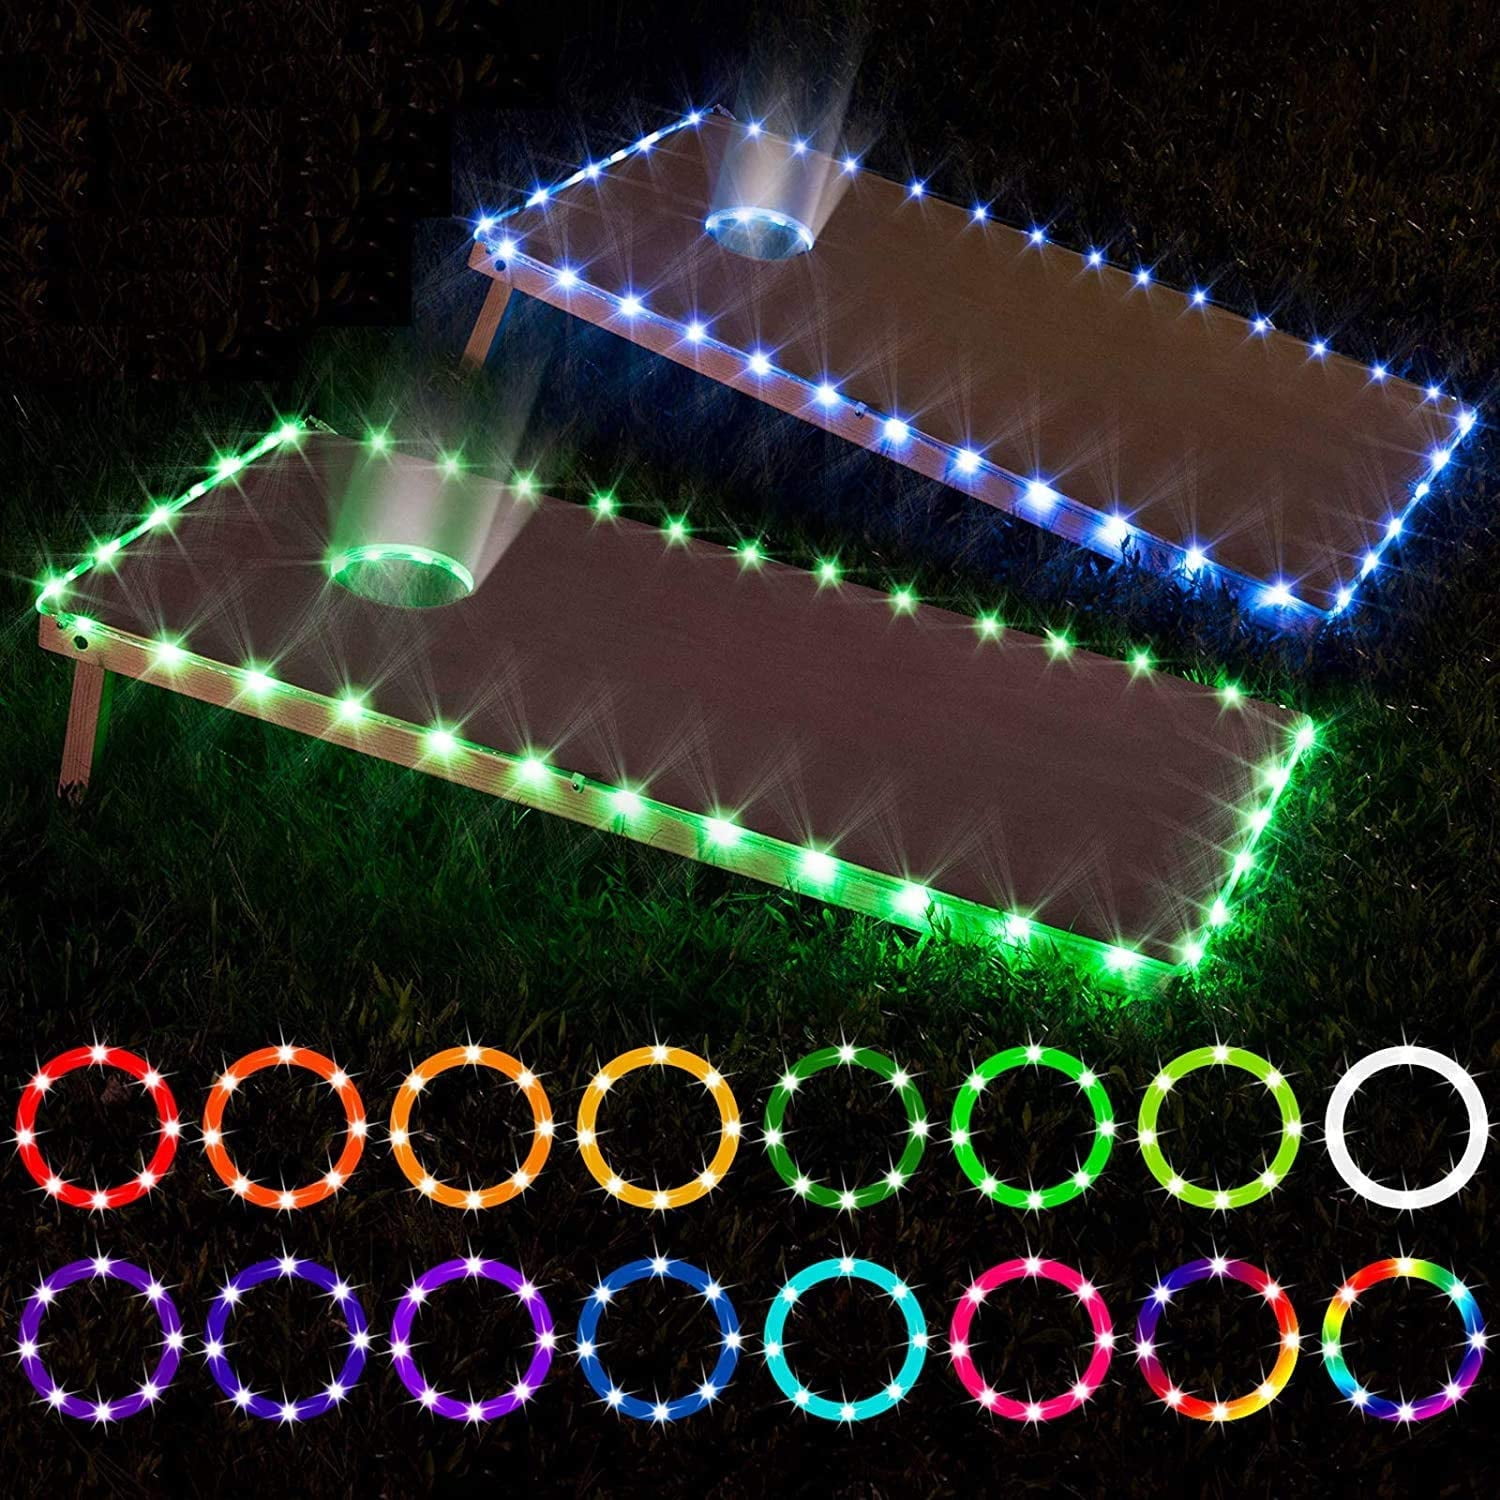 LED Lights, 2 PCS LONGRV Remote Control Cornhole Board Edge and Ring LED Lights for 3x2 and 4x2 FT Cornhole, 16 Colors Great For Playing Bean Bag Toss Game At The